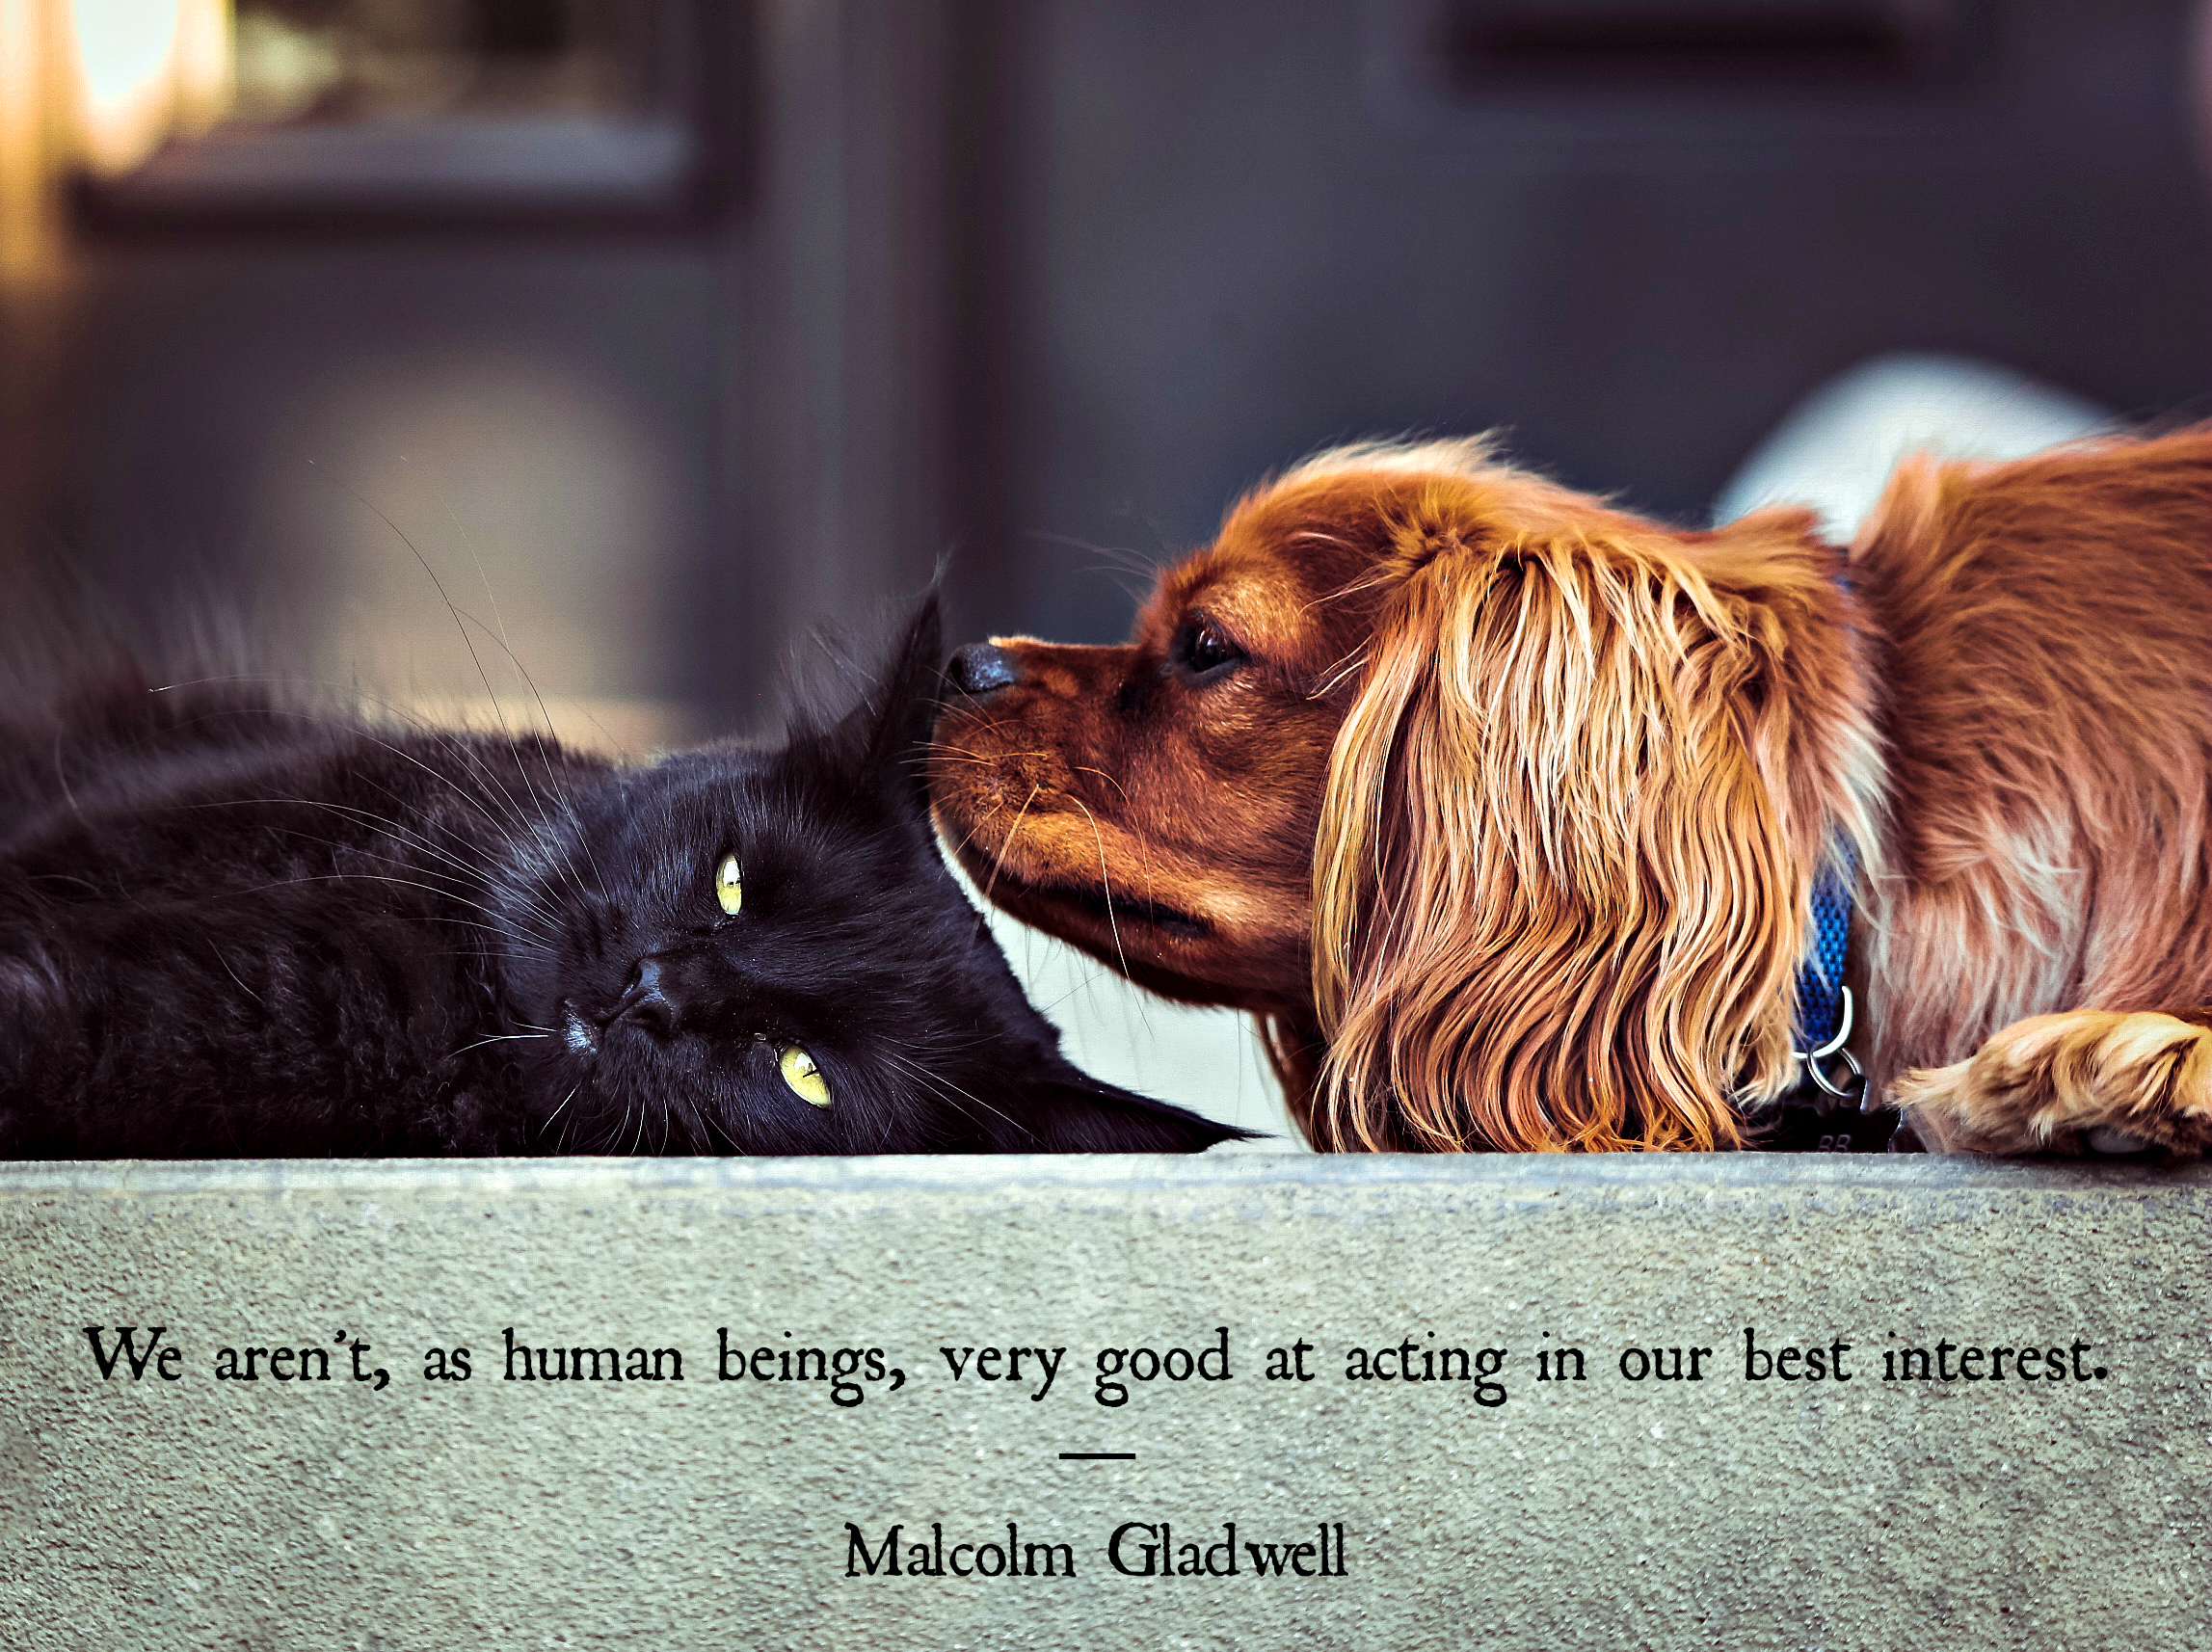 Malcolm Gladwell quote 1.jpg